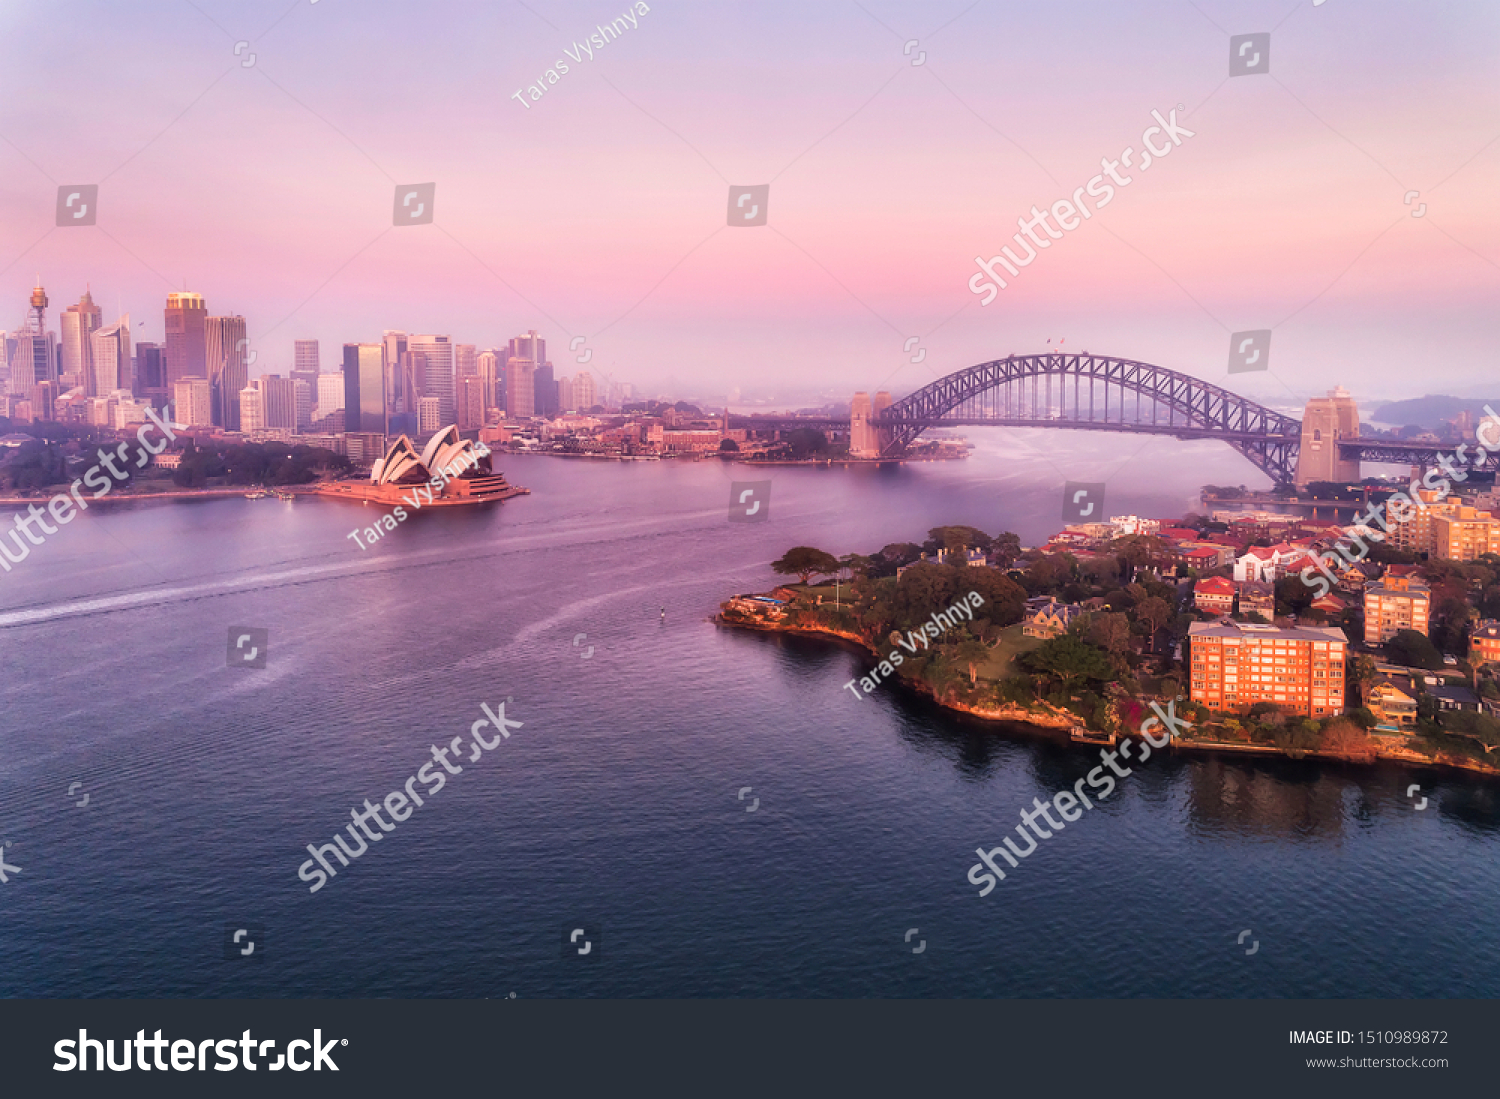 Major landmarks of Sydney city around Sydney harbour and Circular quay across from Kirribilli wealthy suburb on Lower North SHore at sunrise in aerial view. #1510989872